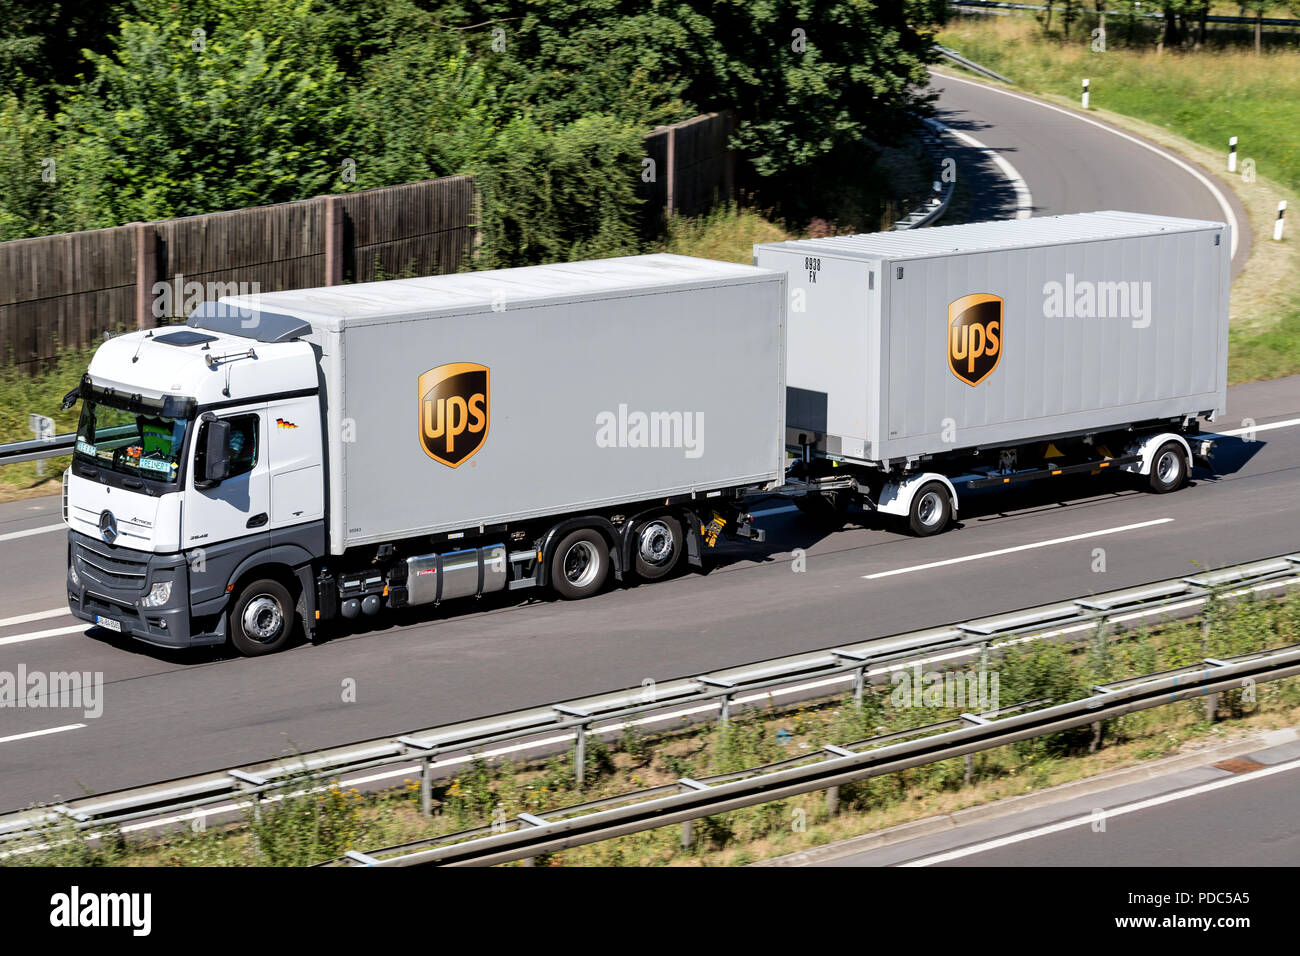 UPS truck on motorway. UPS is the world's largest package delivery company and a provider of supply chain management solutions. Stock Photo